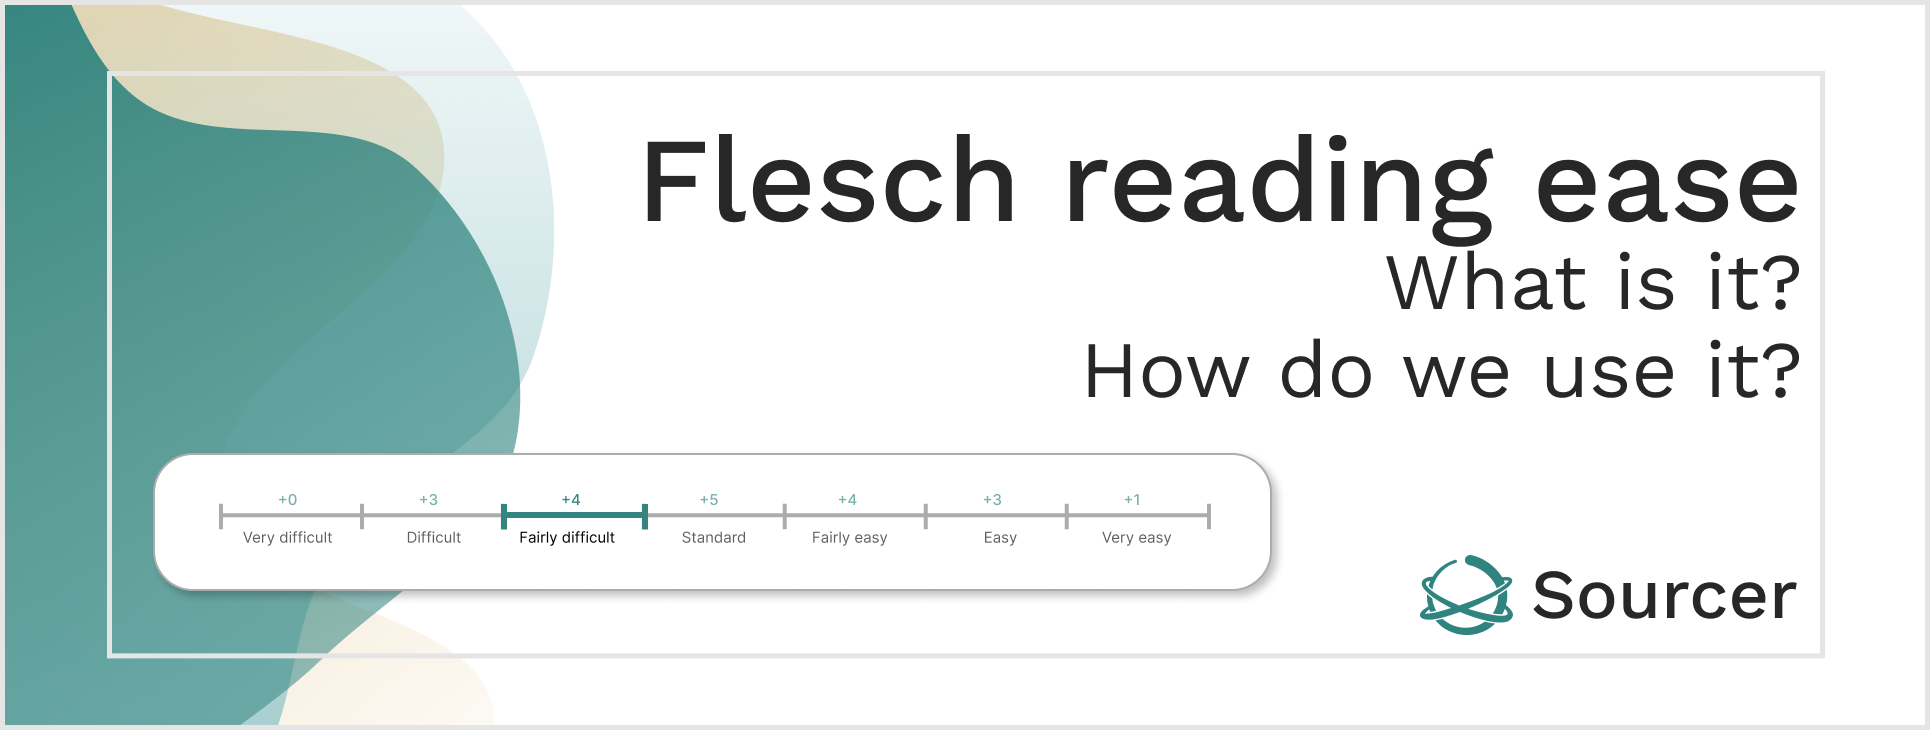 Flesch reading ease: what it is and how we use it-image